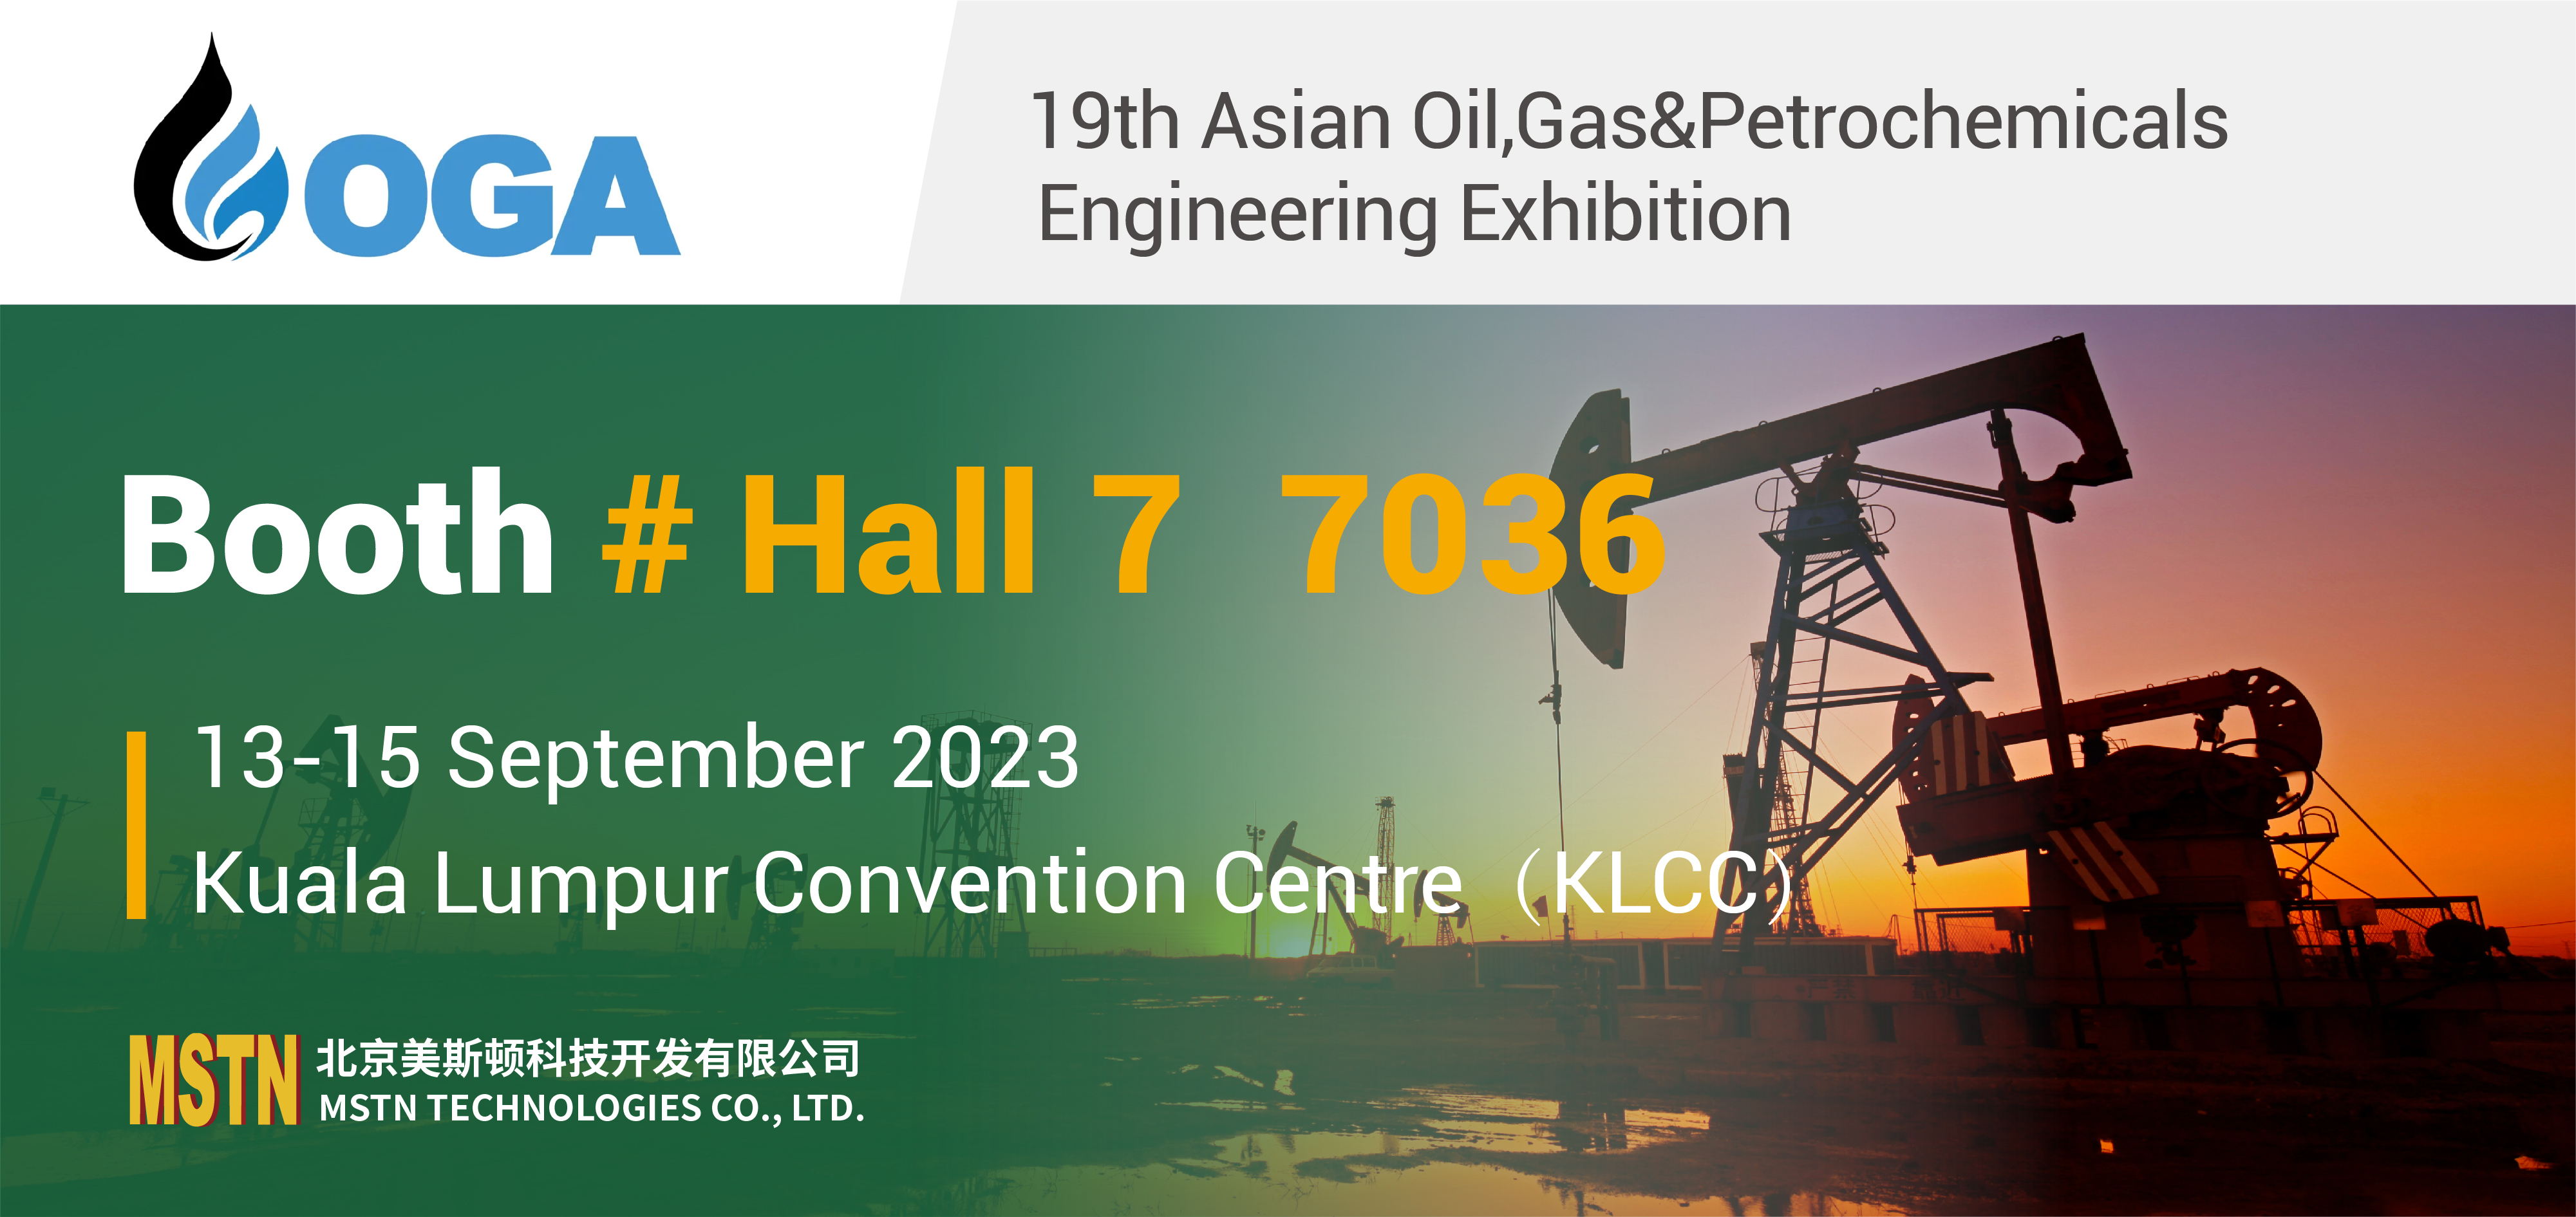 Welcome to visit 19th Asian Oil, Gas